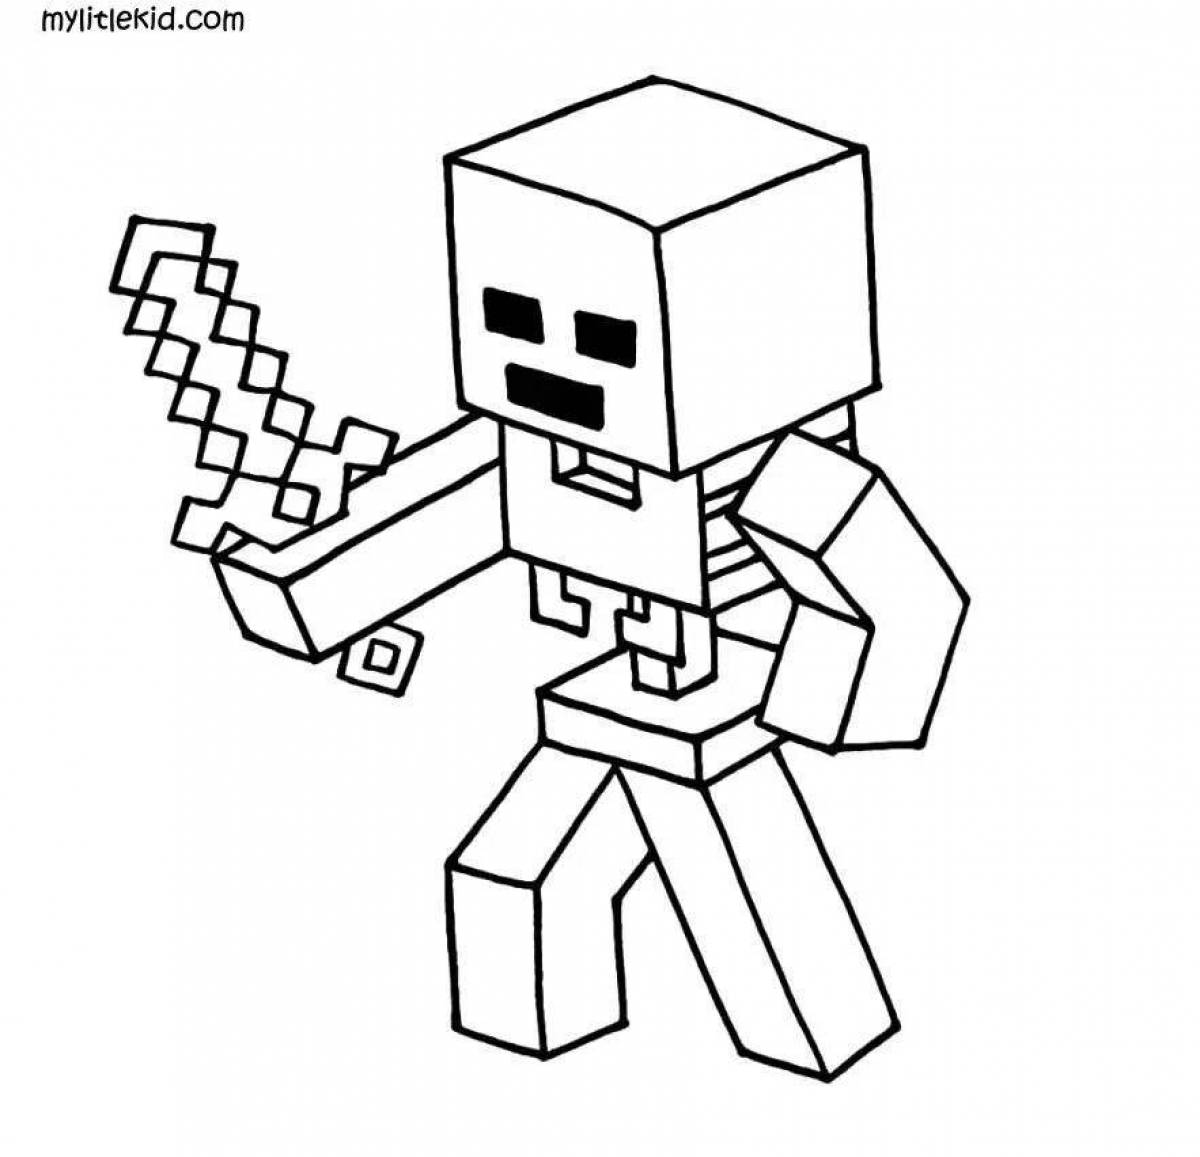 Amazing Christmas coloring for minecraft